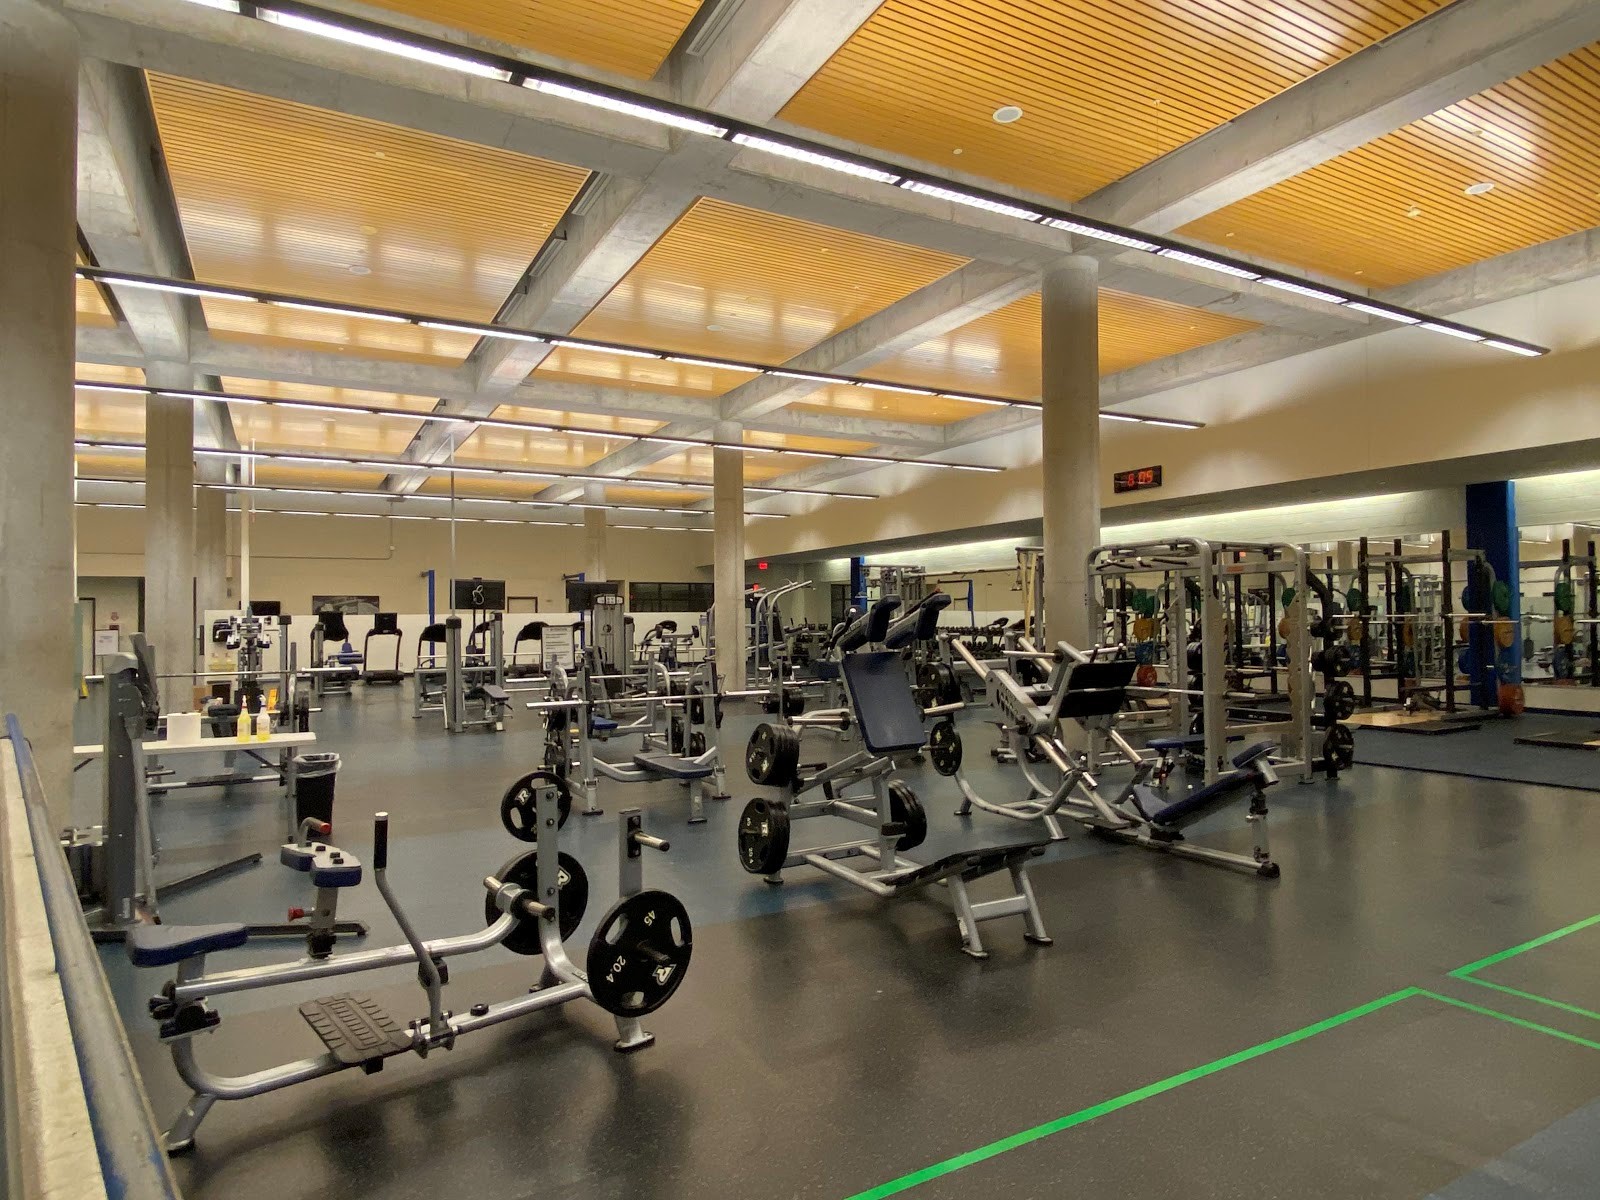 MAC Fitness Center with spatially distanced equipment following COVID-19 safety measures.